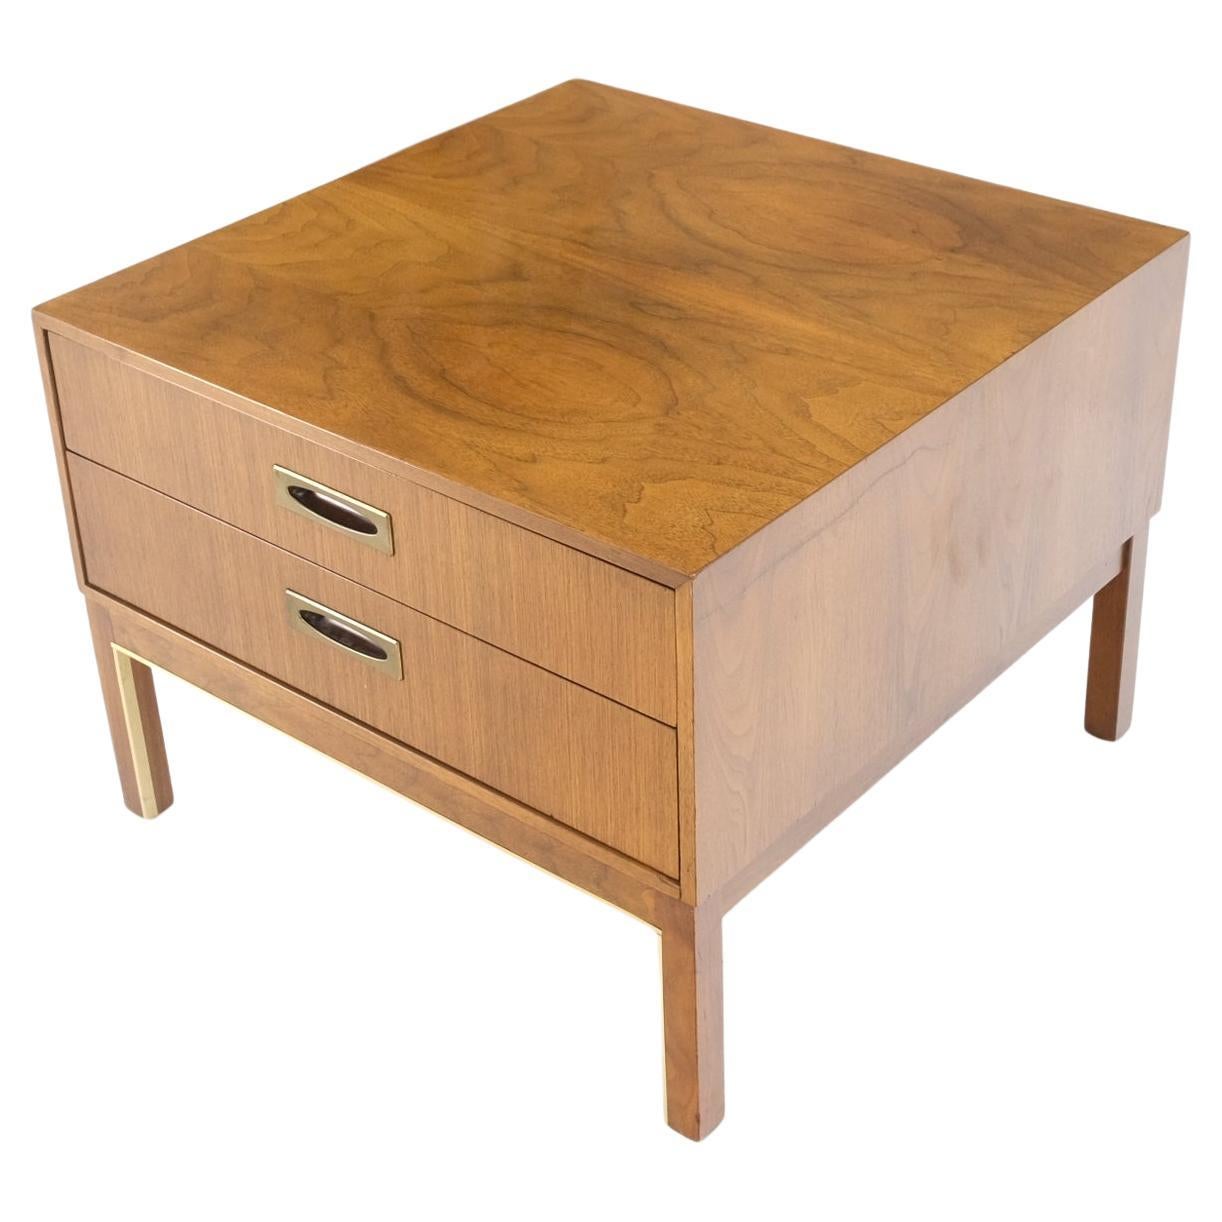 Large Oversize Cube Shape Square 2 Drawers Light Walnut Nightstand Table Mint For Sale